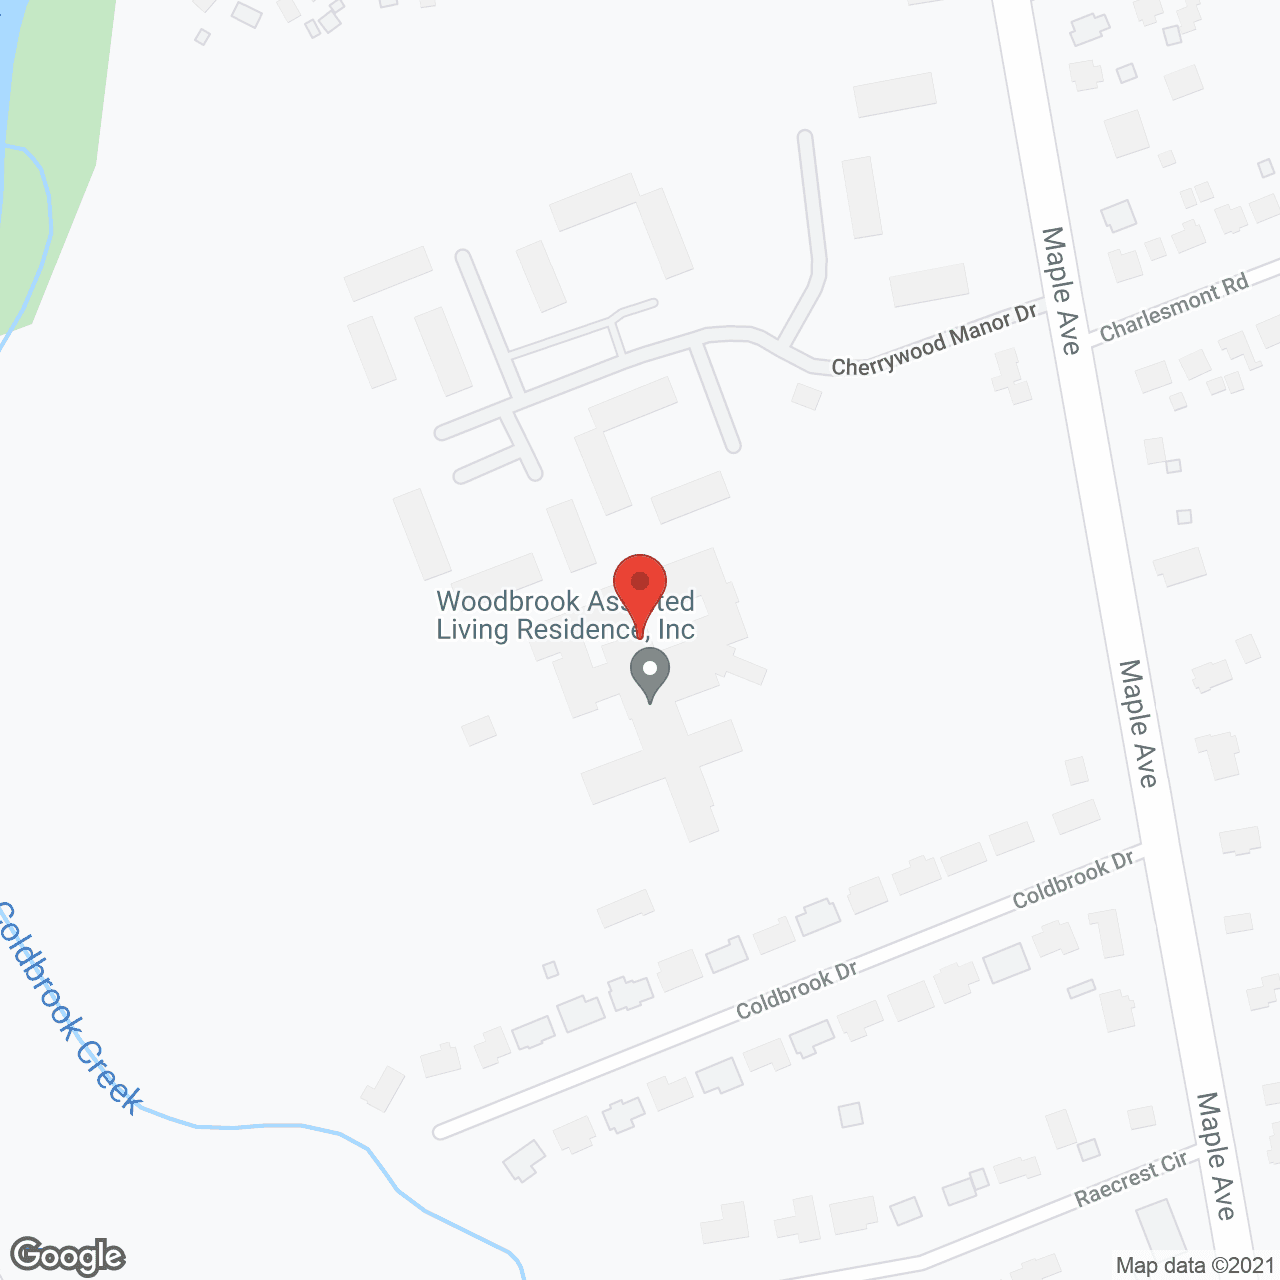 Woodbrook Assisted Living Residence in google map